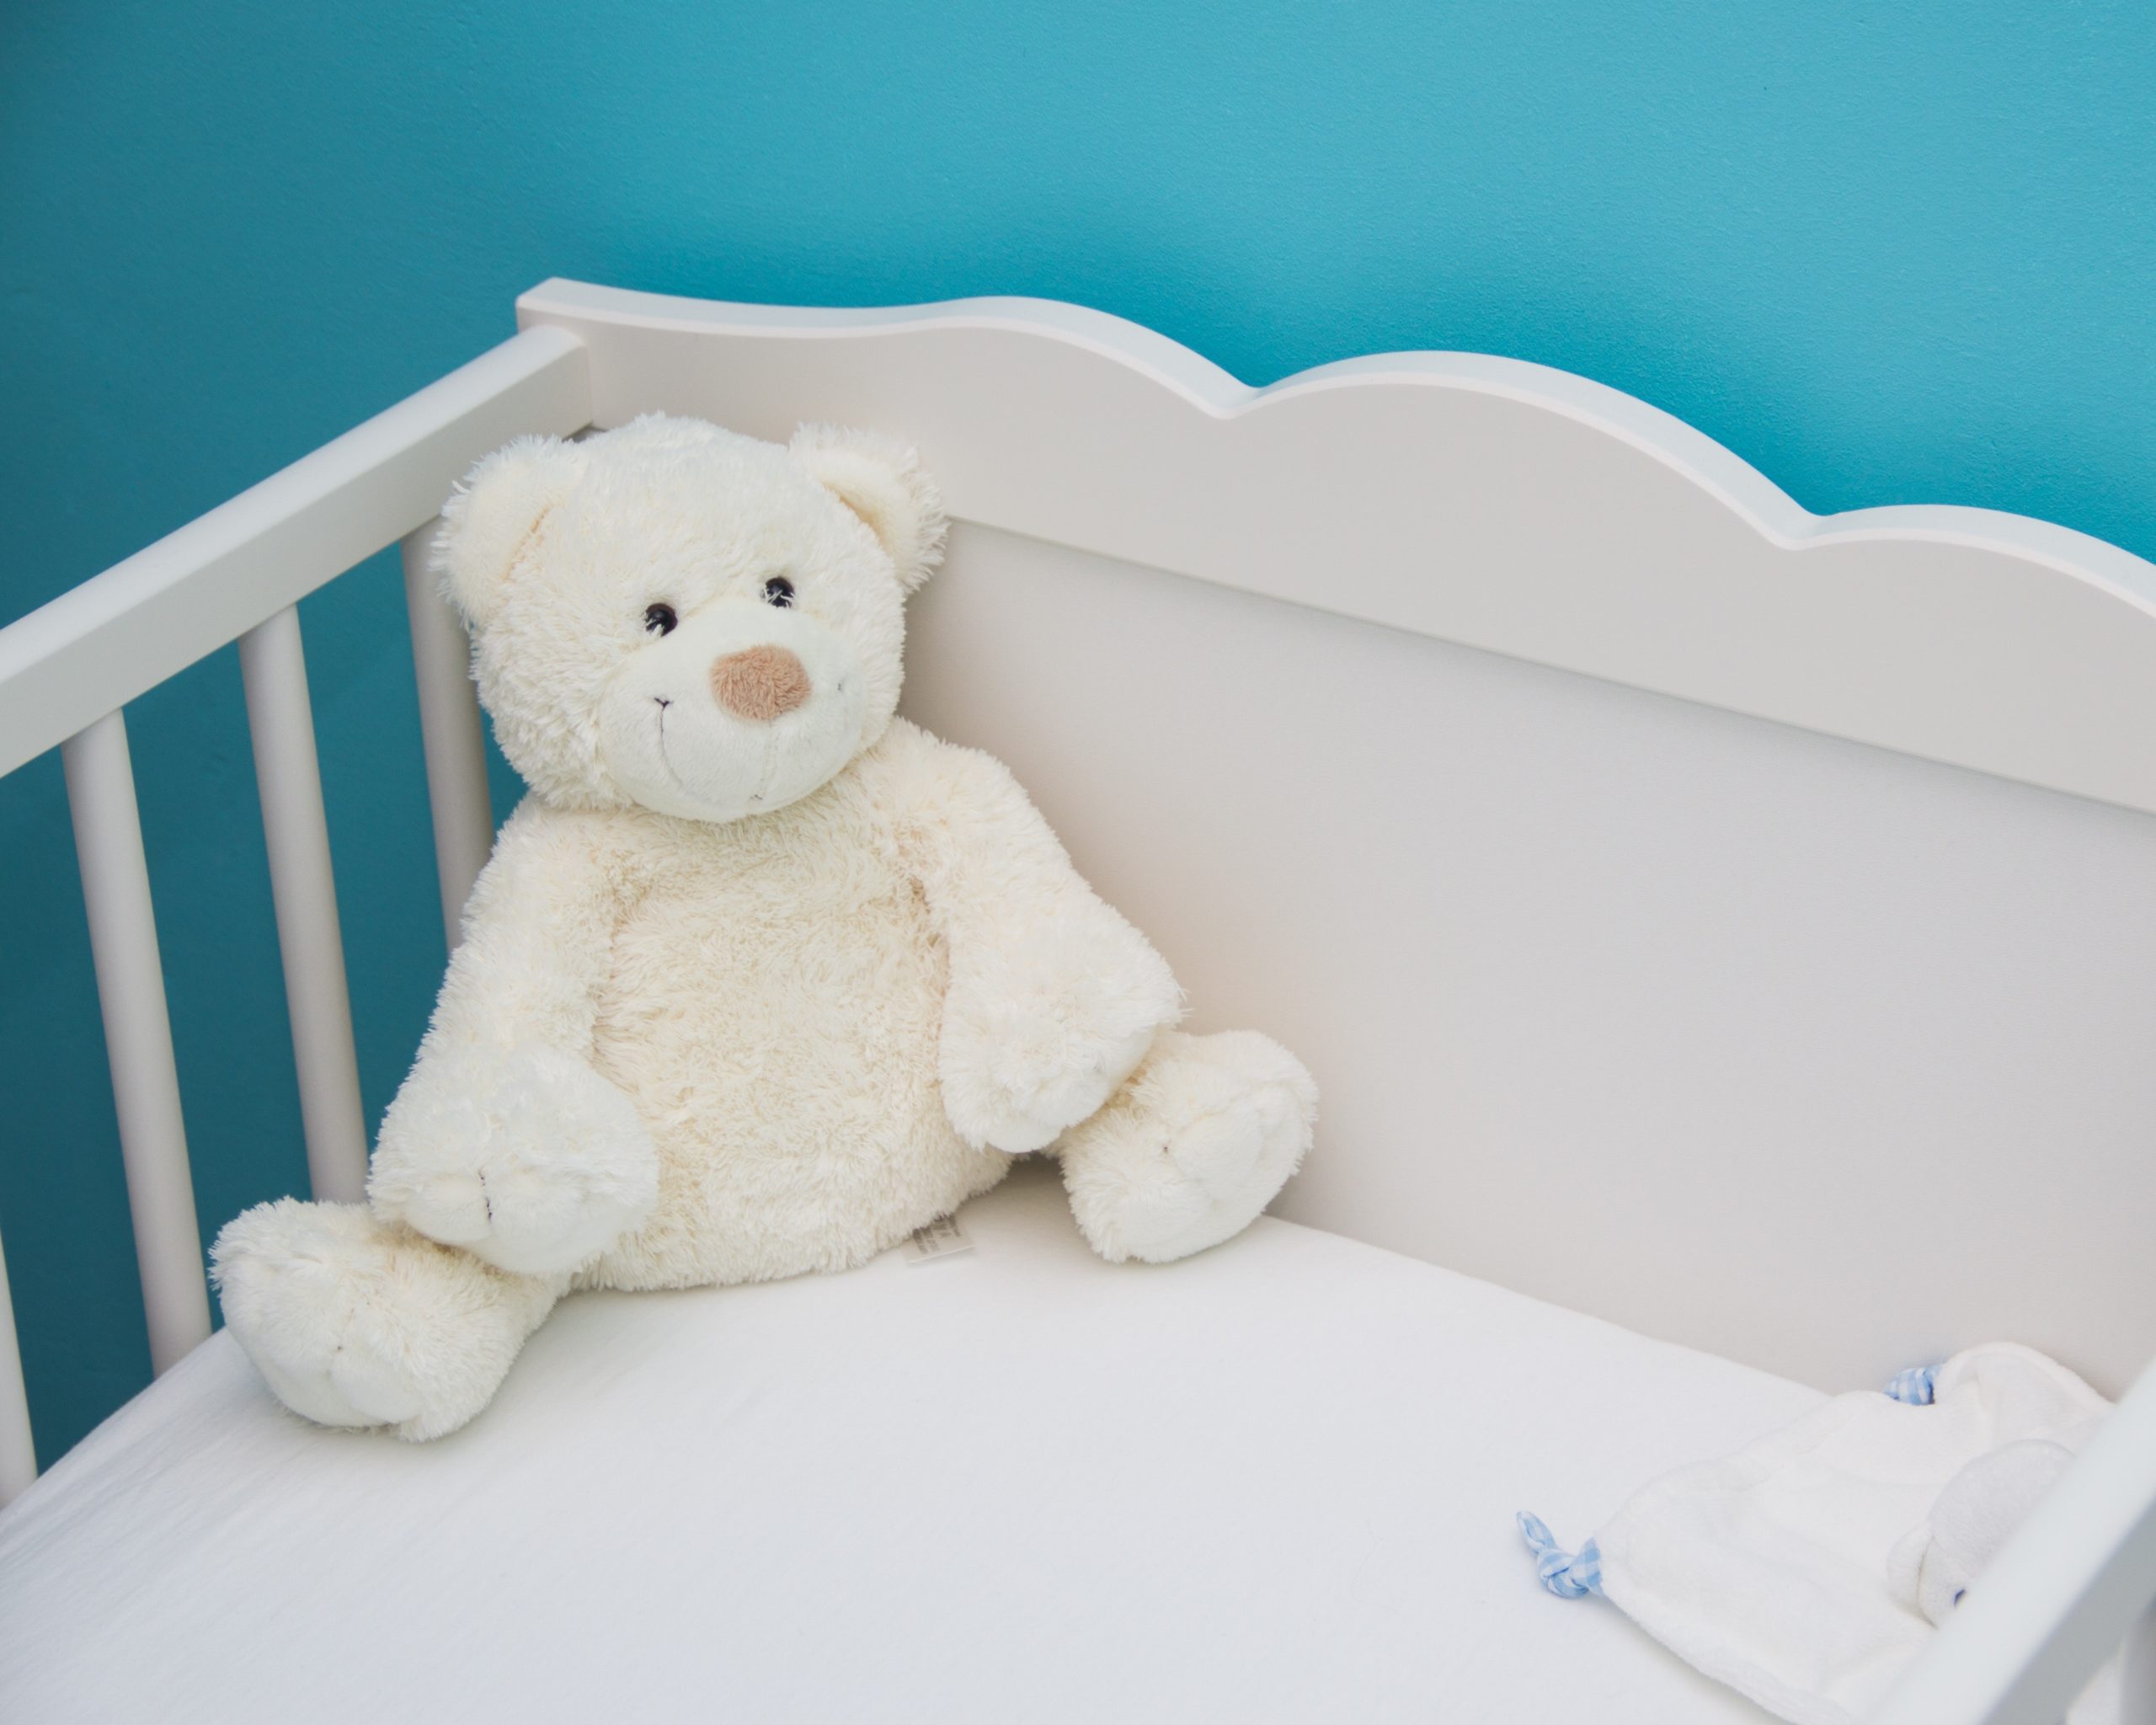 When to put your baby in toddler bed